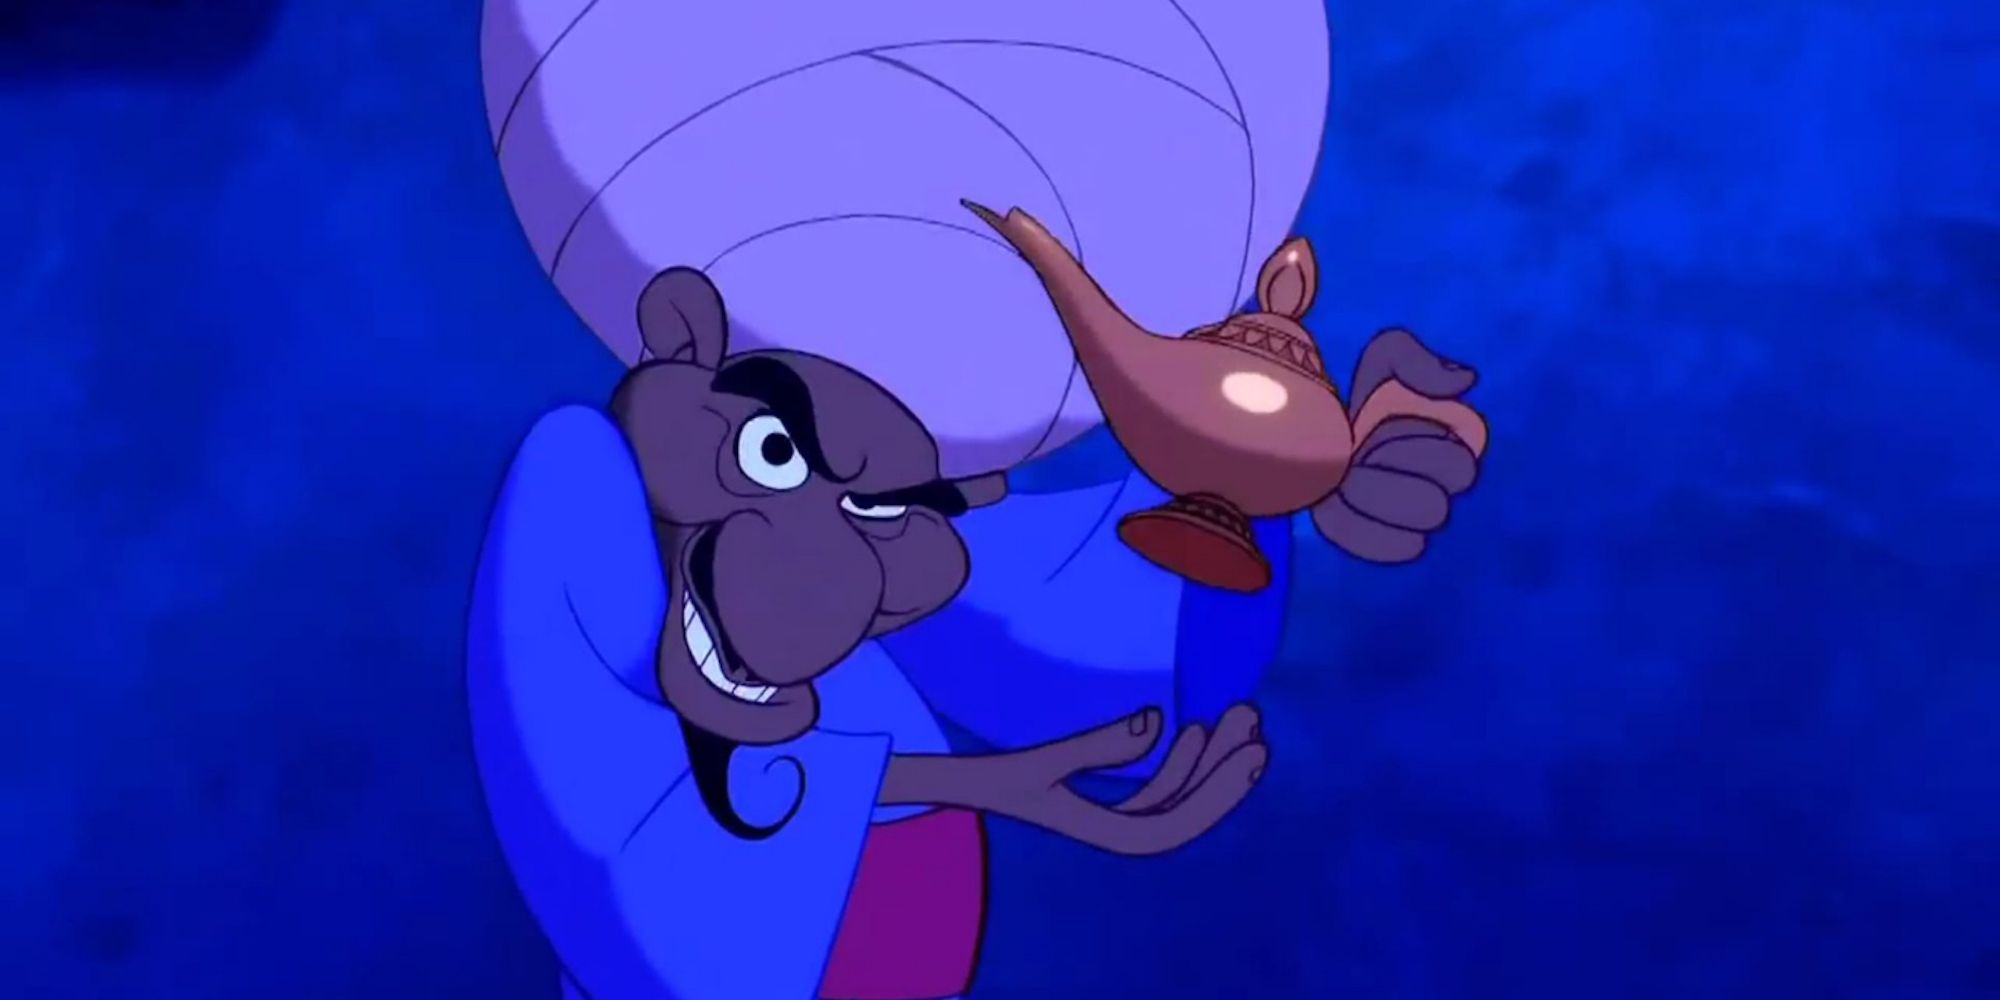 Aladdin: Differences Between Disney's Version And The Original Tale